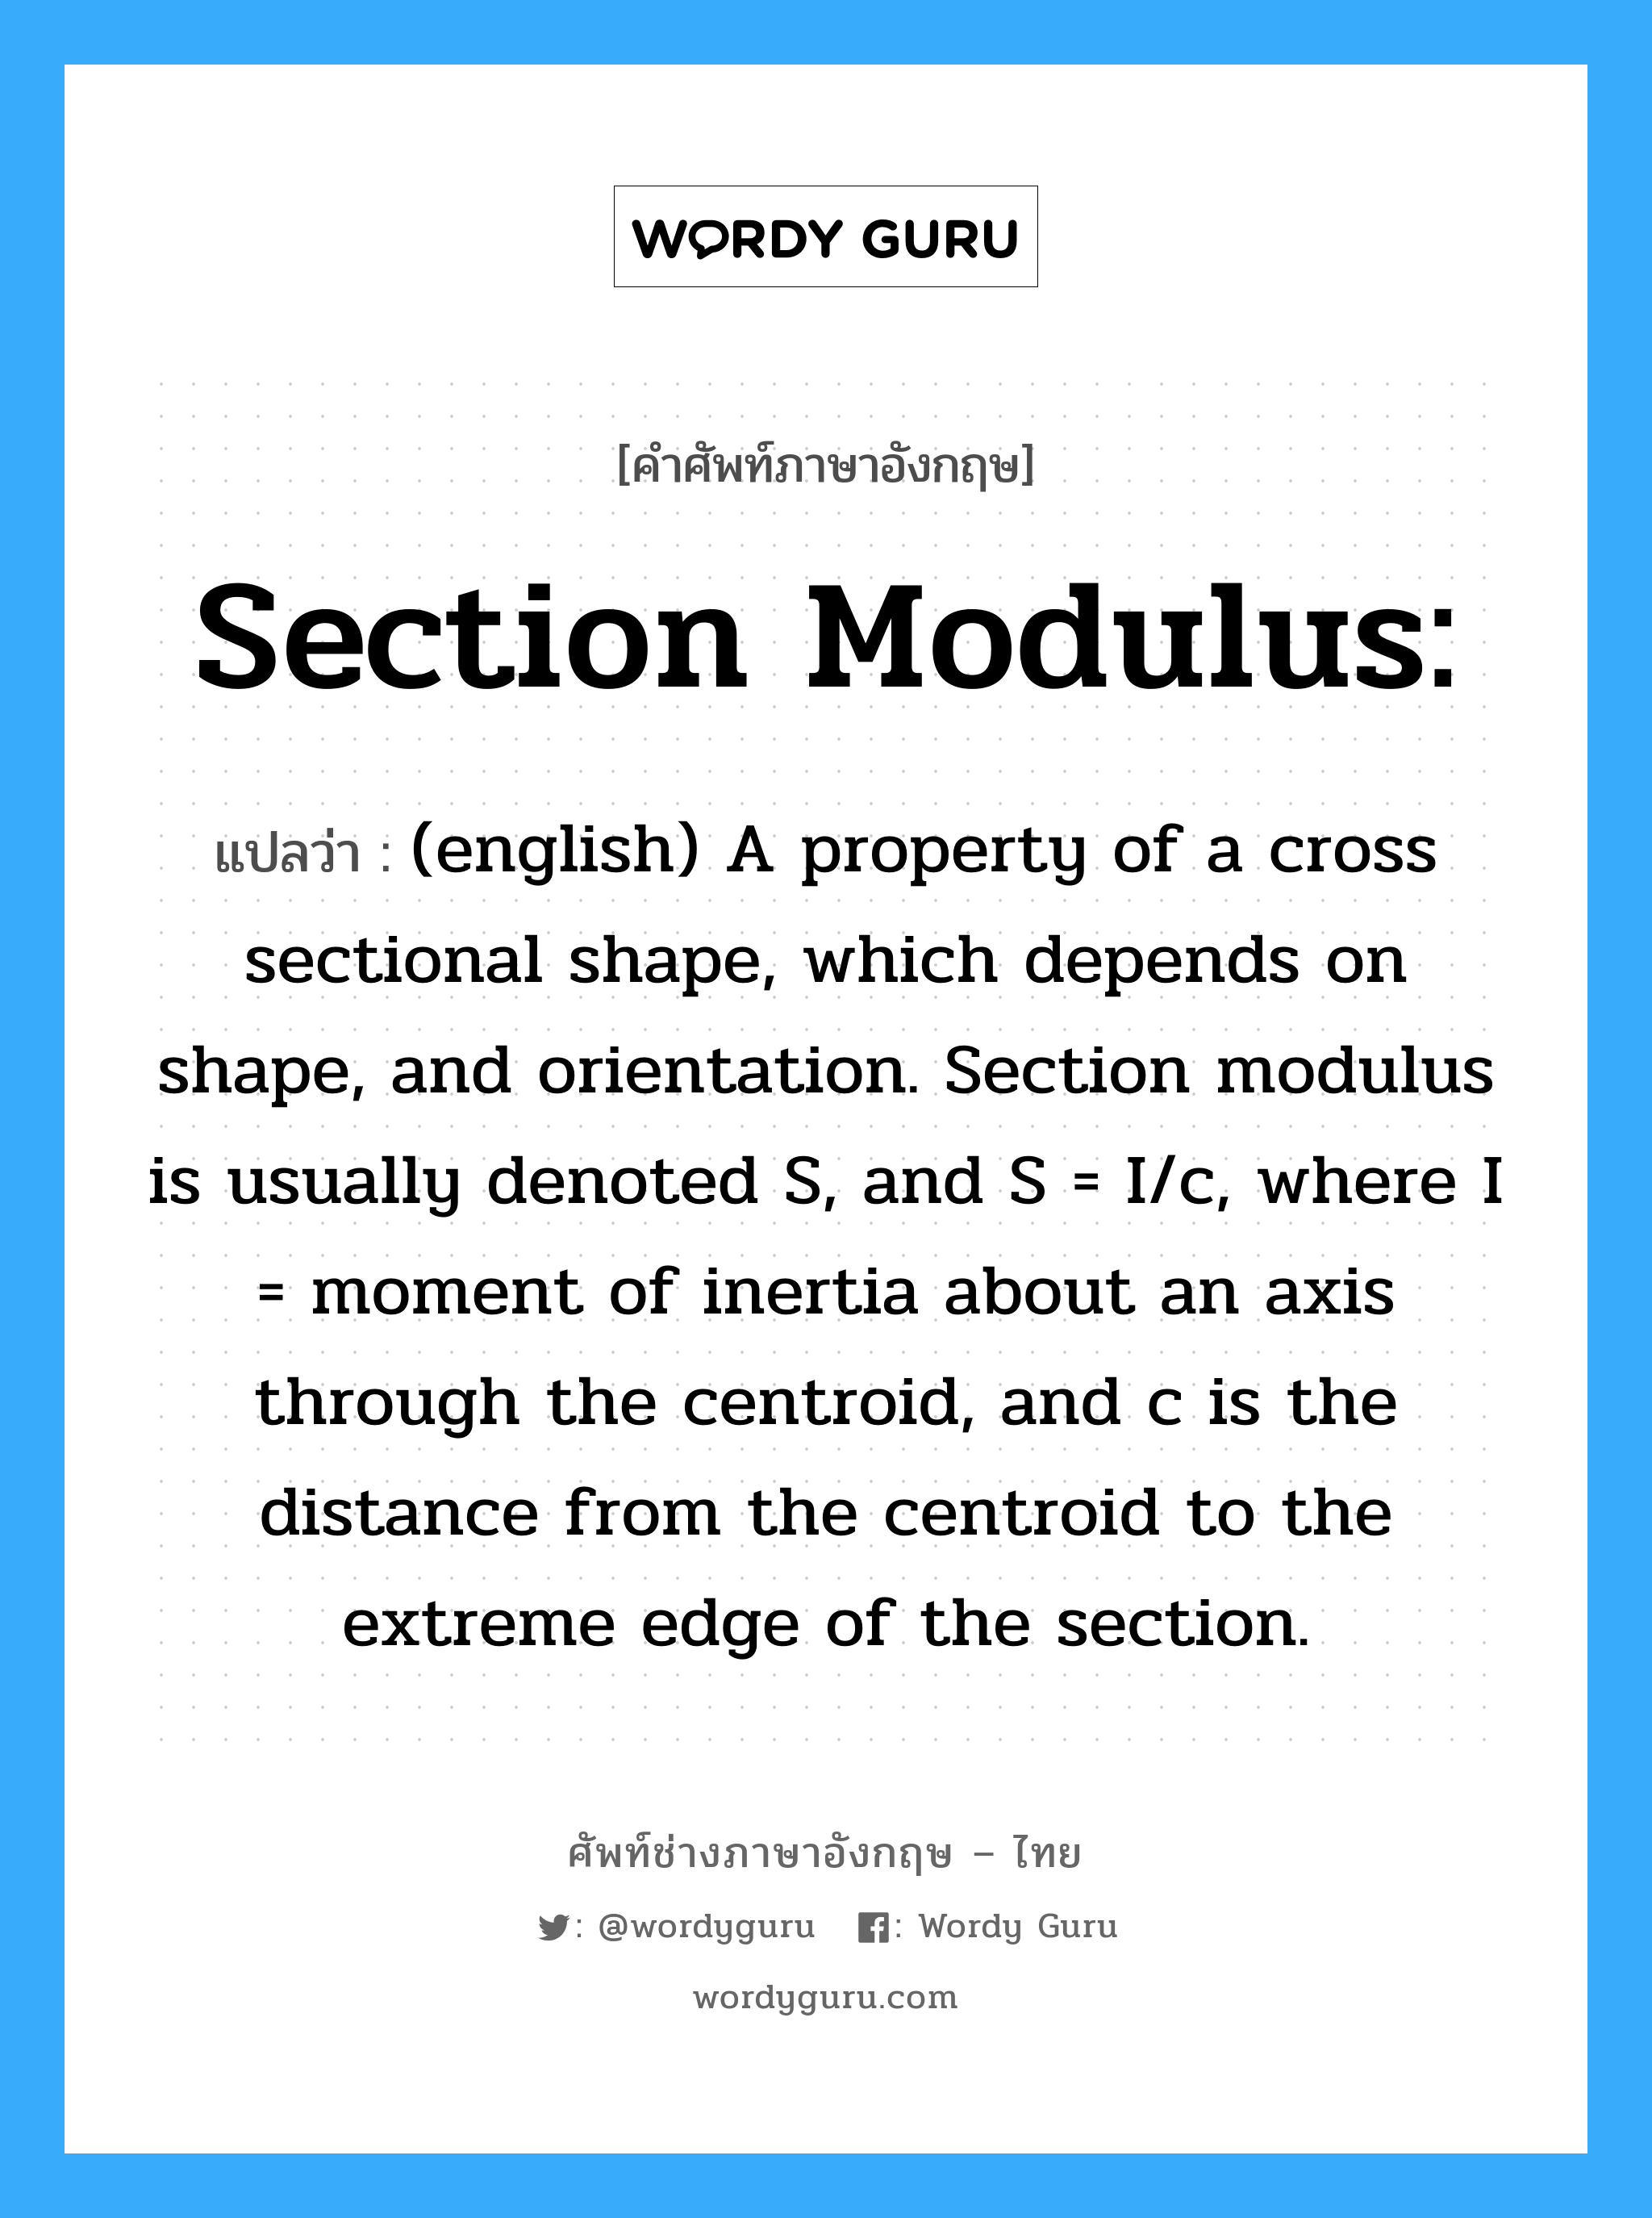 Section Modulus: แปลว่า?, คำศัพท์ช่างภาษาอังกฤษ - ไทย Section Modulus: คำศัพท์ภาษาอังกฤษ Section Modulus: แปลว่า (english) A property of a cross sectional shape, which depends on shape, and orientation. Section modulus is usually denoted S, and S = I/c, where I = moment of inertia about an axis through the centroid, and c is the distance from the centroid to the extreme edge of the section.